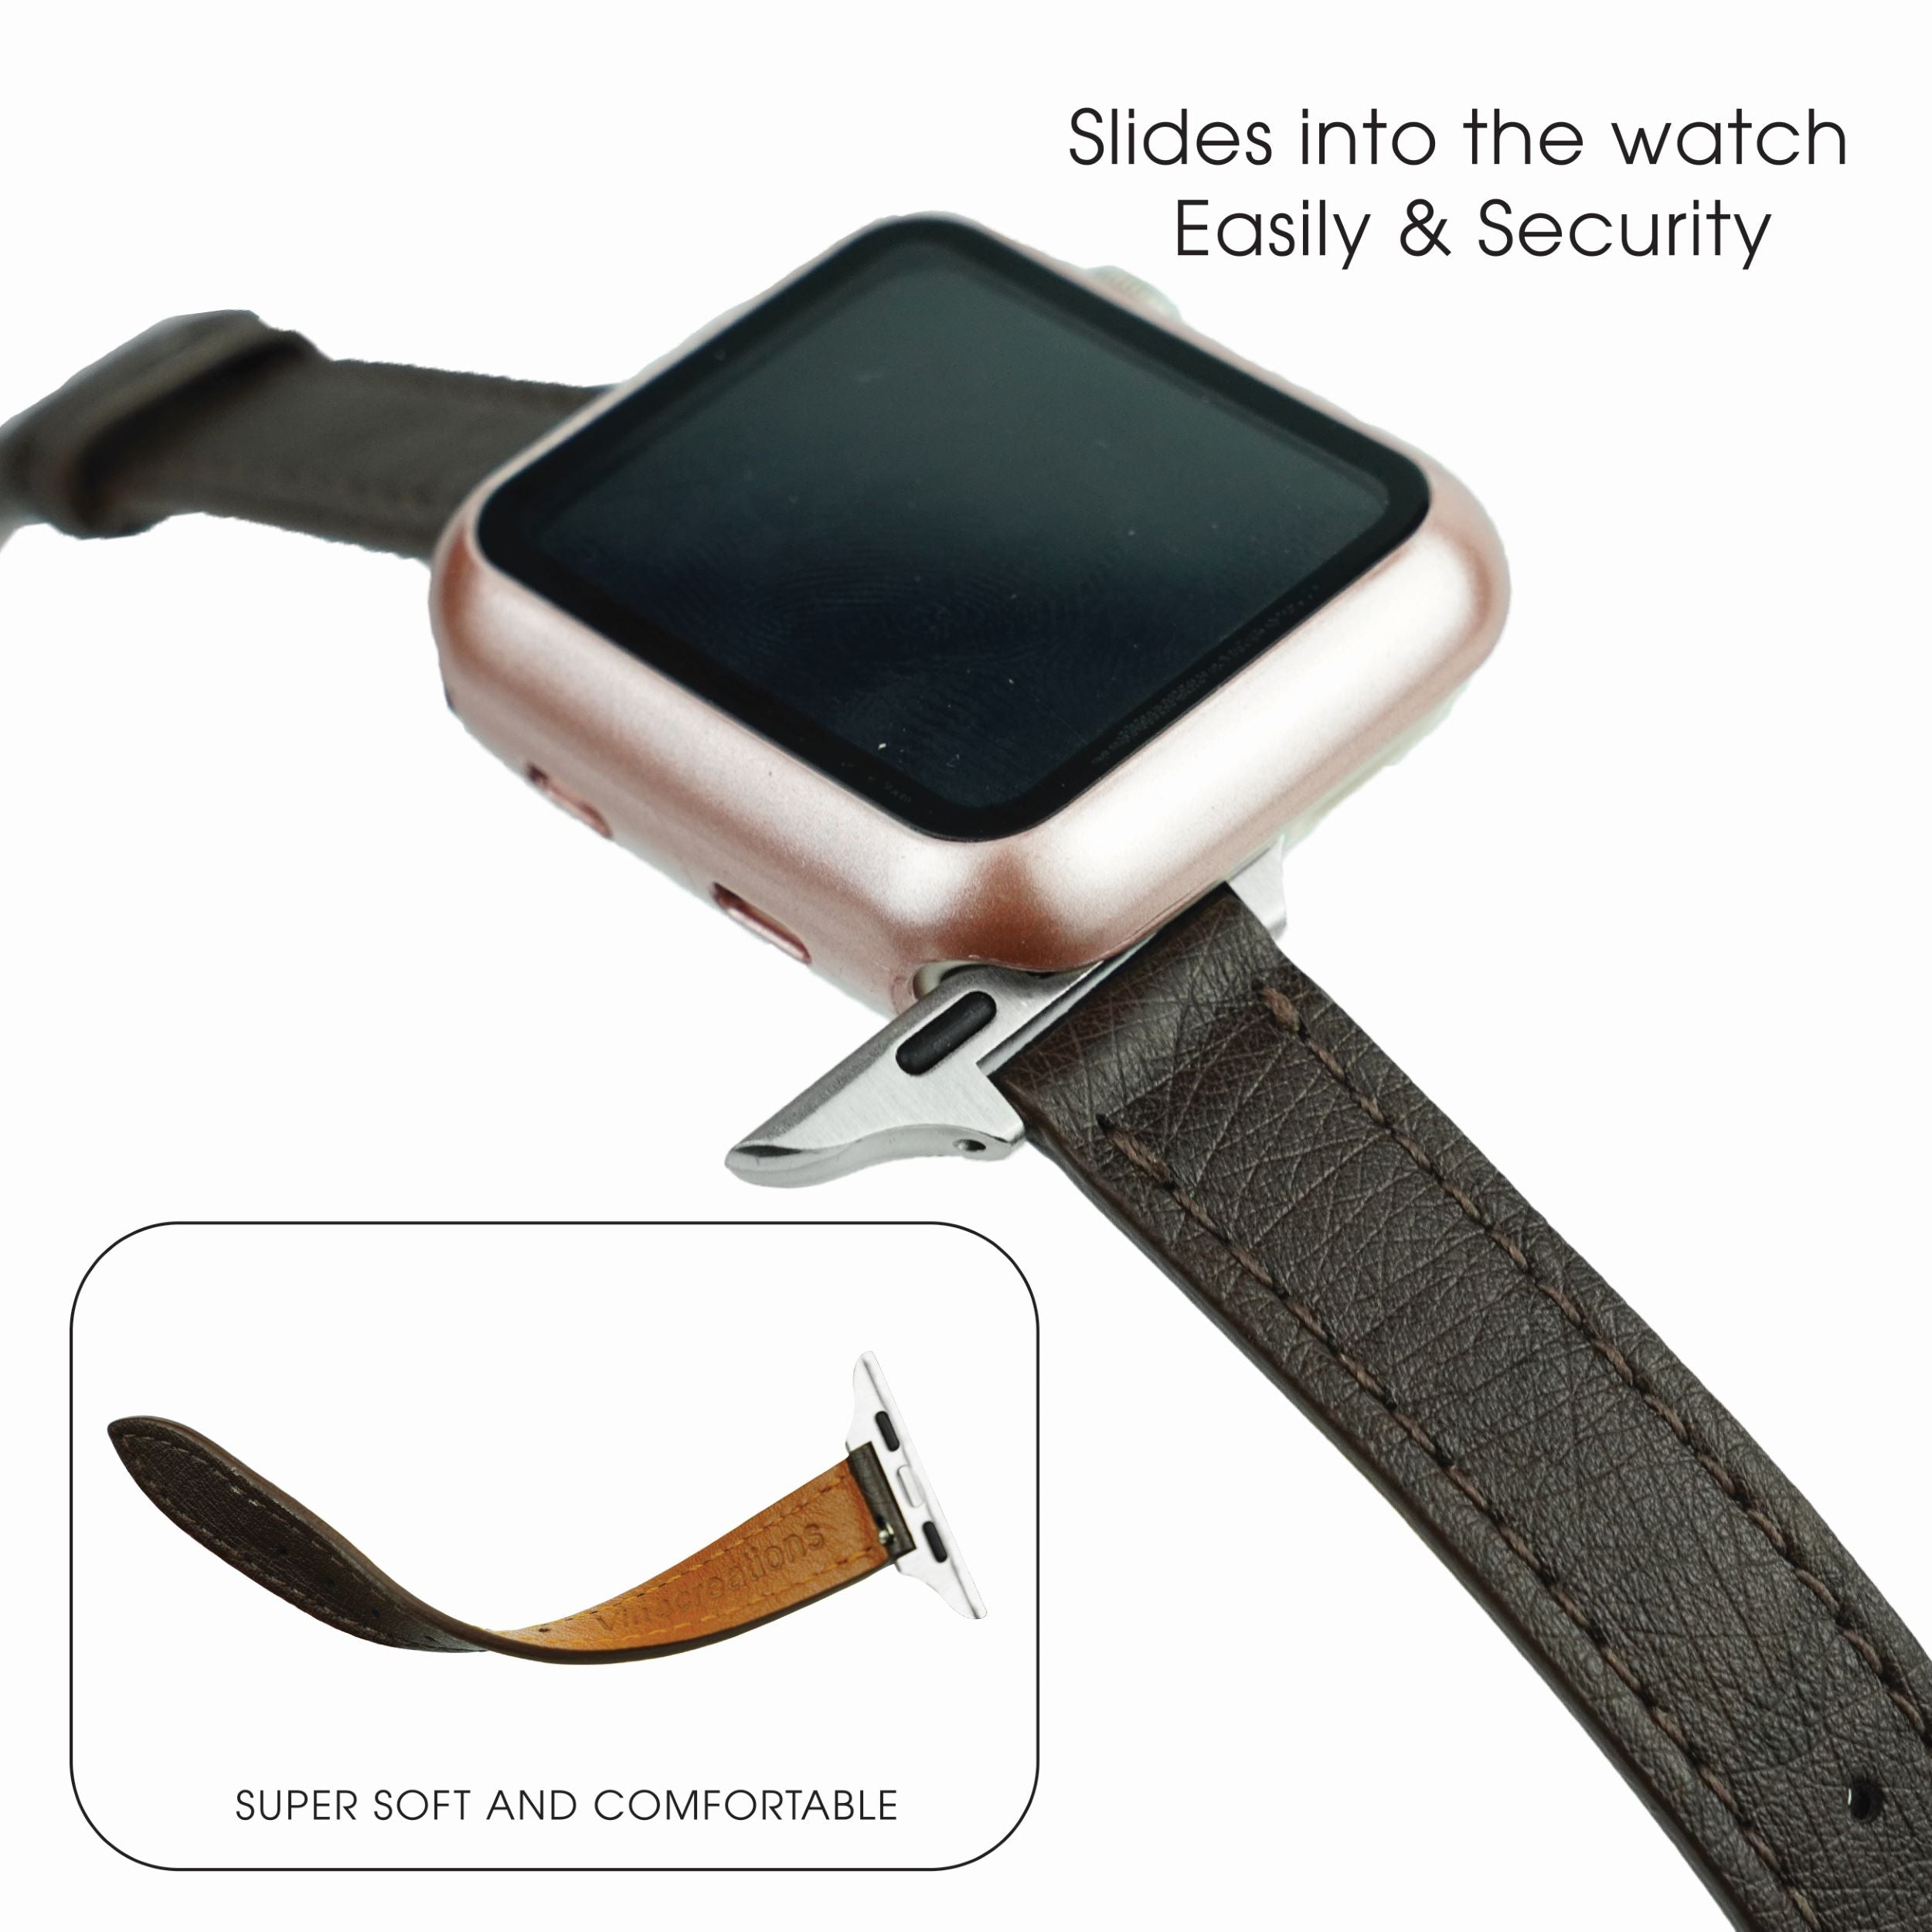 Dark Brown Flat Ostrich Leather Band Compatible Apple Watch Iwatch 38mm Screen Protector Case Silver Adapter Replacement Strap For Smartwatch Series 1 2 3 Leather Handmade AW-183S-W-38MM